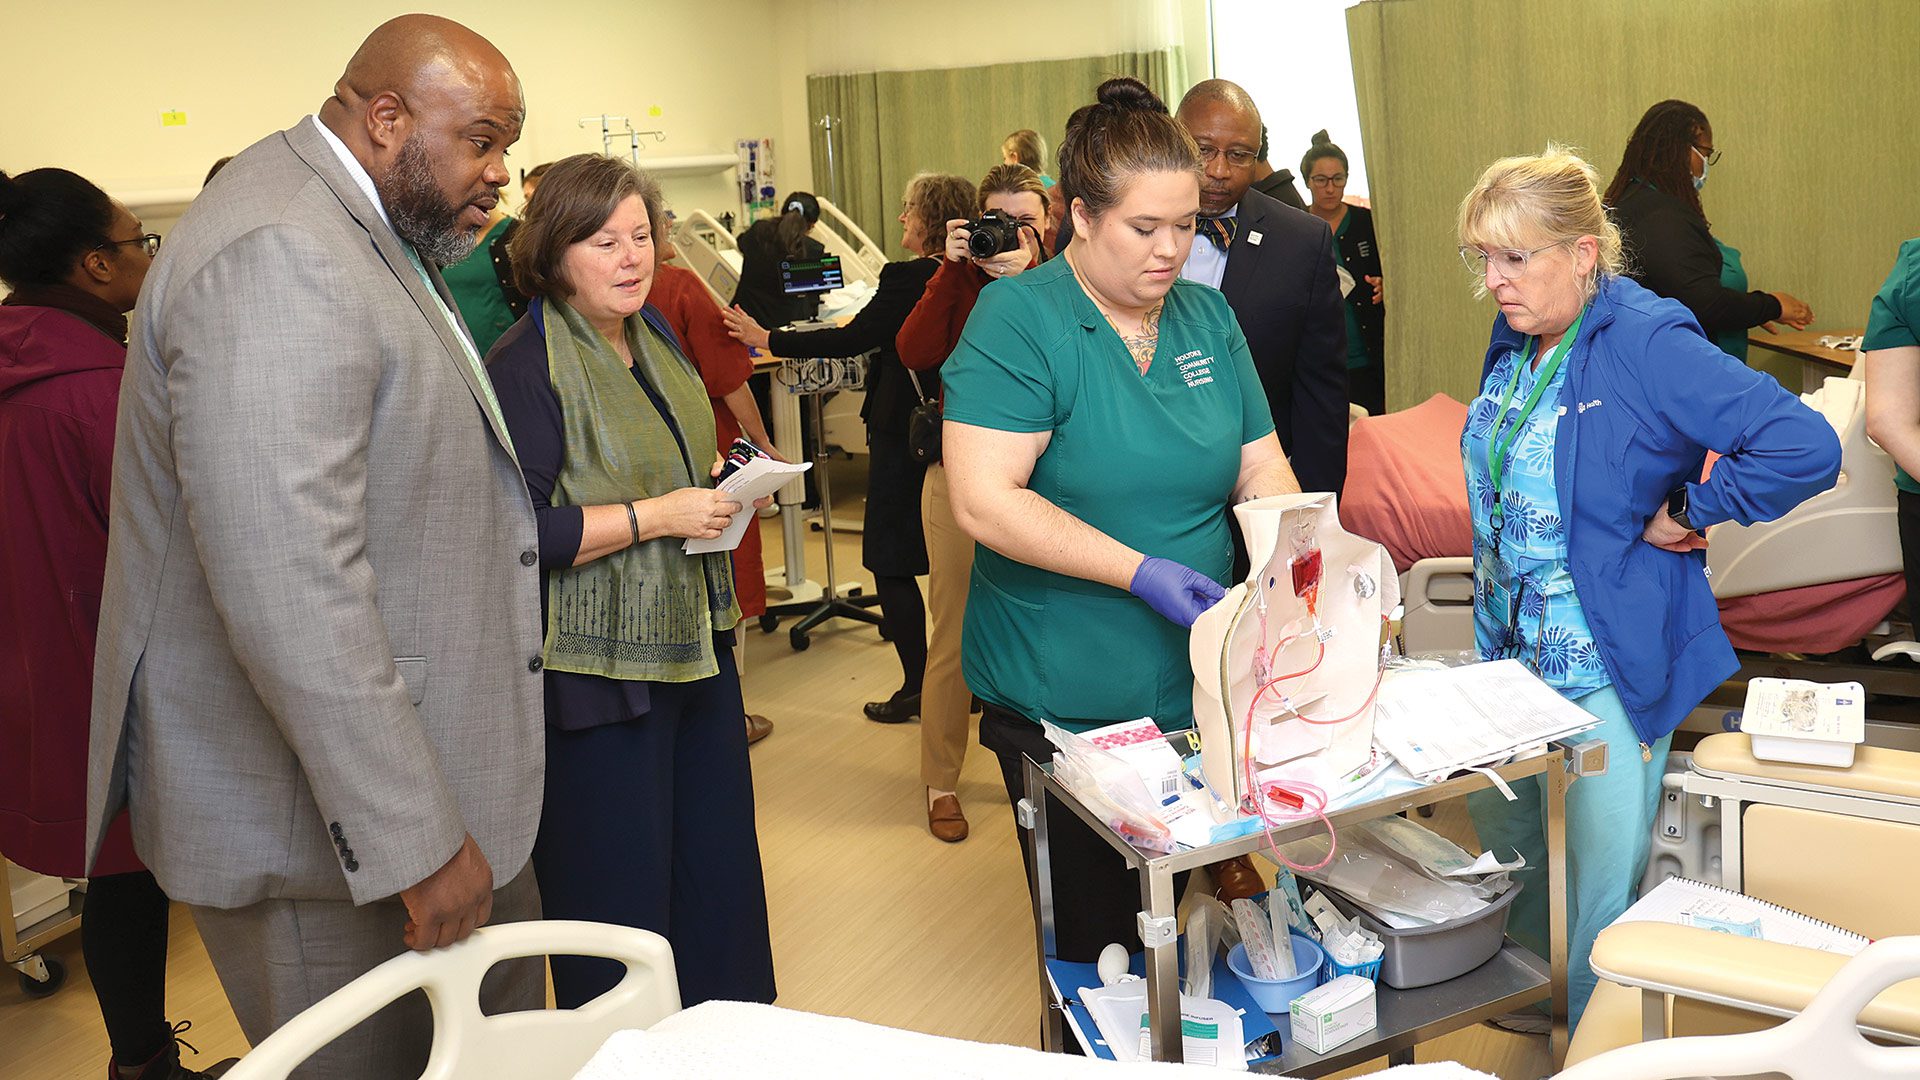 Pictured: HCC nursing student Katelynn Richard, center, practices under the supervision of Instructor Dorothy Shannon as Secretary of Education Patrick Tutwiler, state Sen. Jo Comerford, and HCC President George Timmons look on